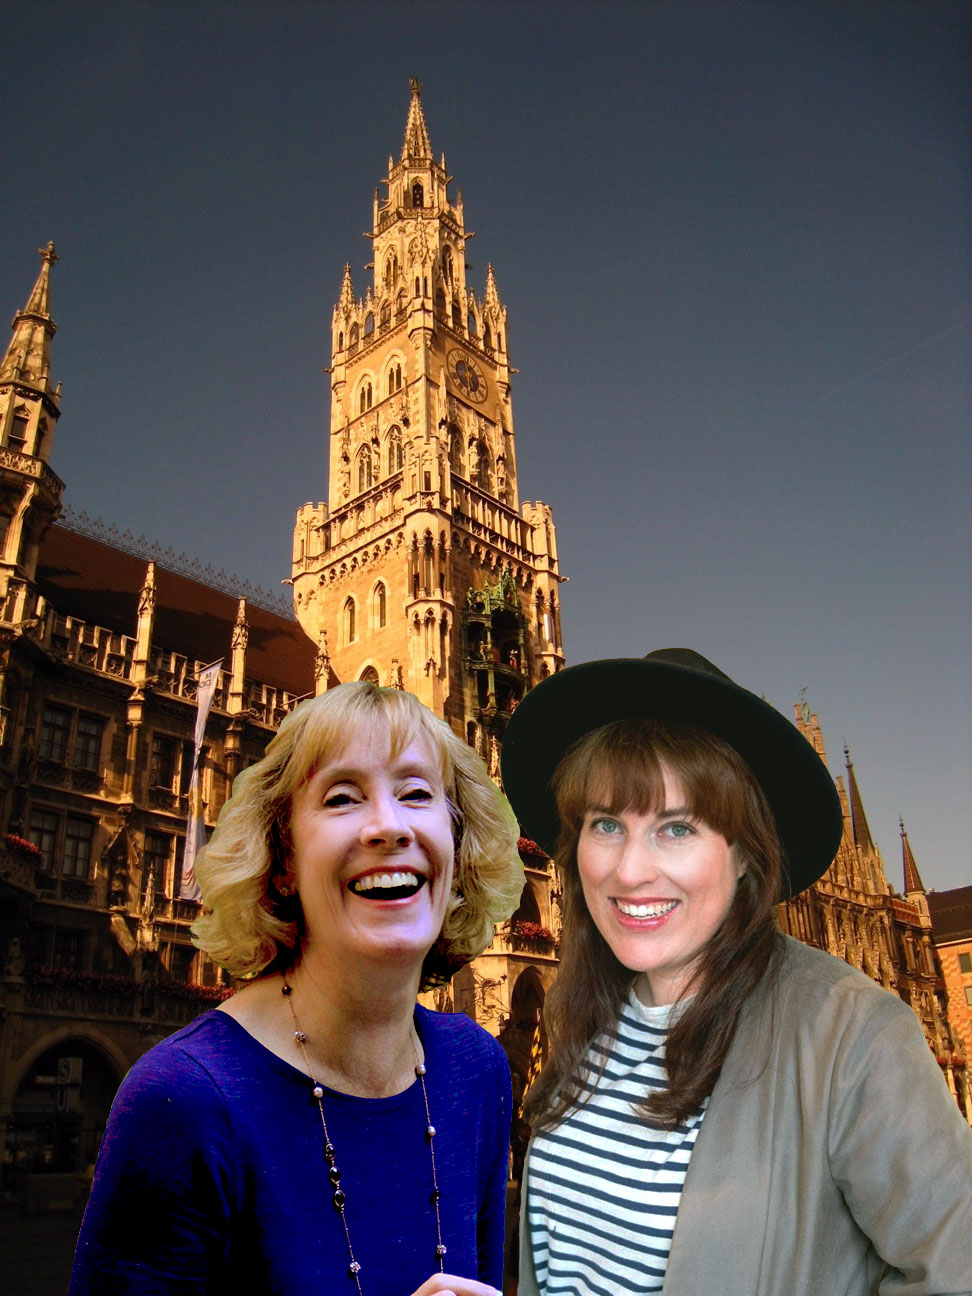 Neues Rathaus with travel buddy Morgan Tarpley Smith—see Glockenspiel in center of tower (Photo courtesy of Pauline Trummel)